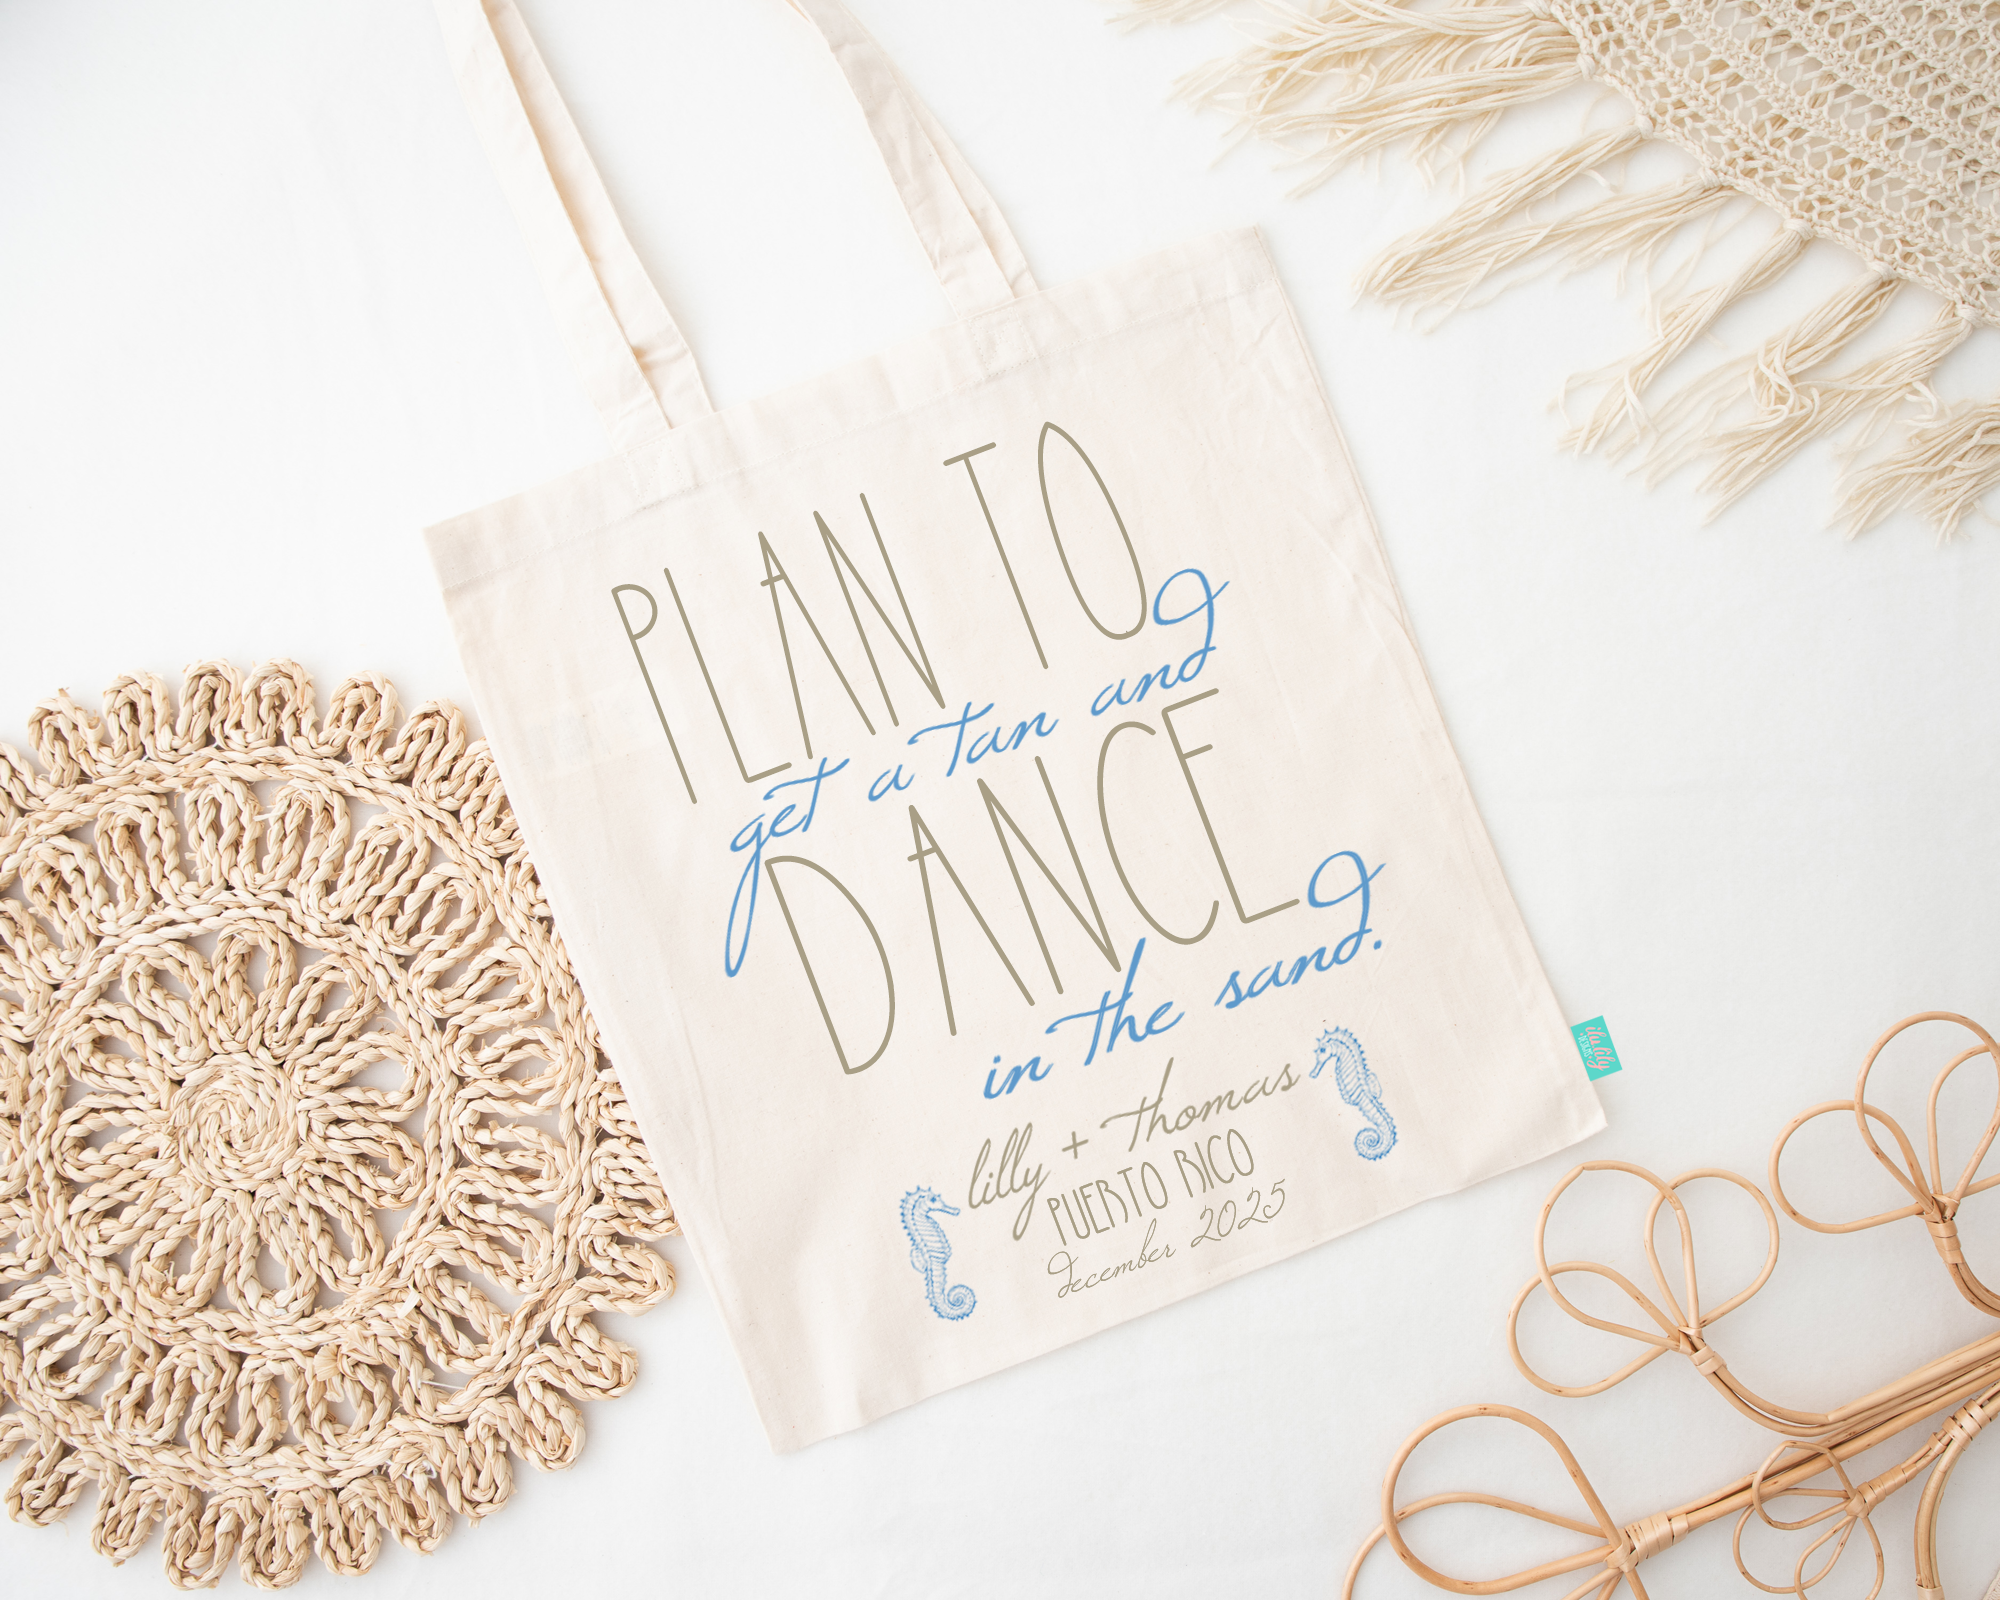 Destination Wedding Tote Bag | Plan to Get a Tan and Dance in the Sand